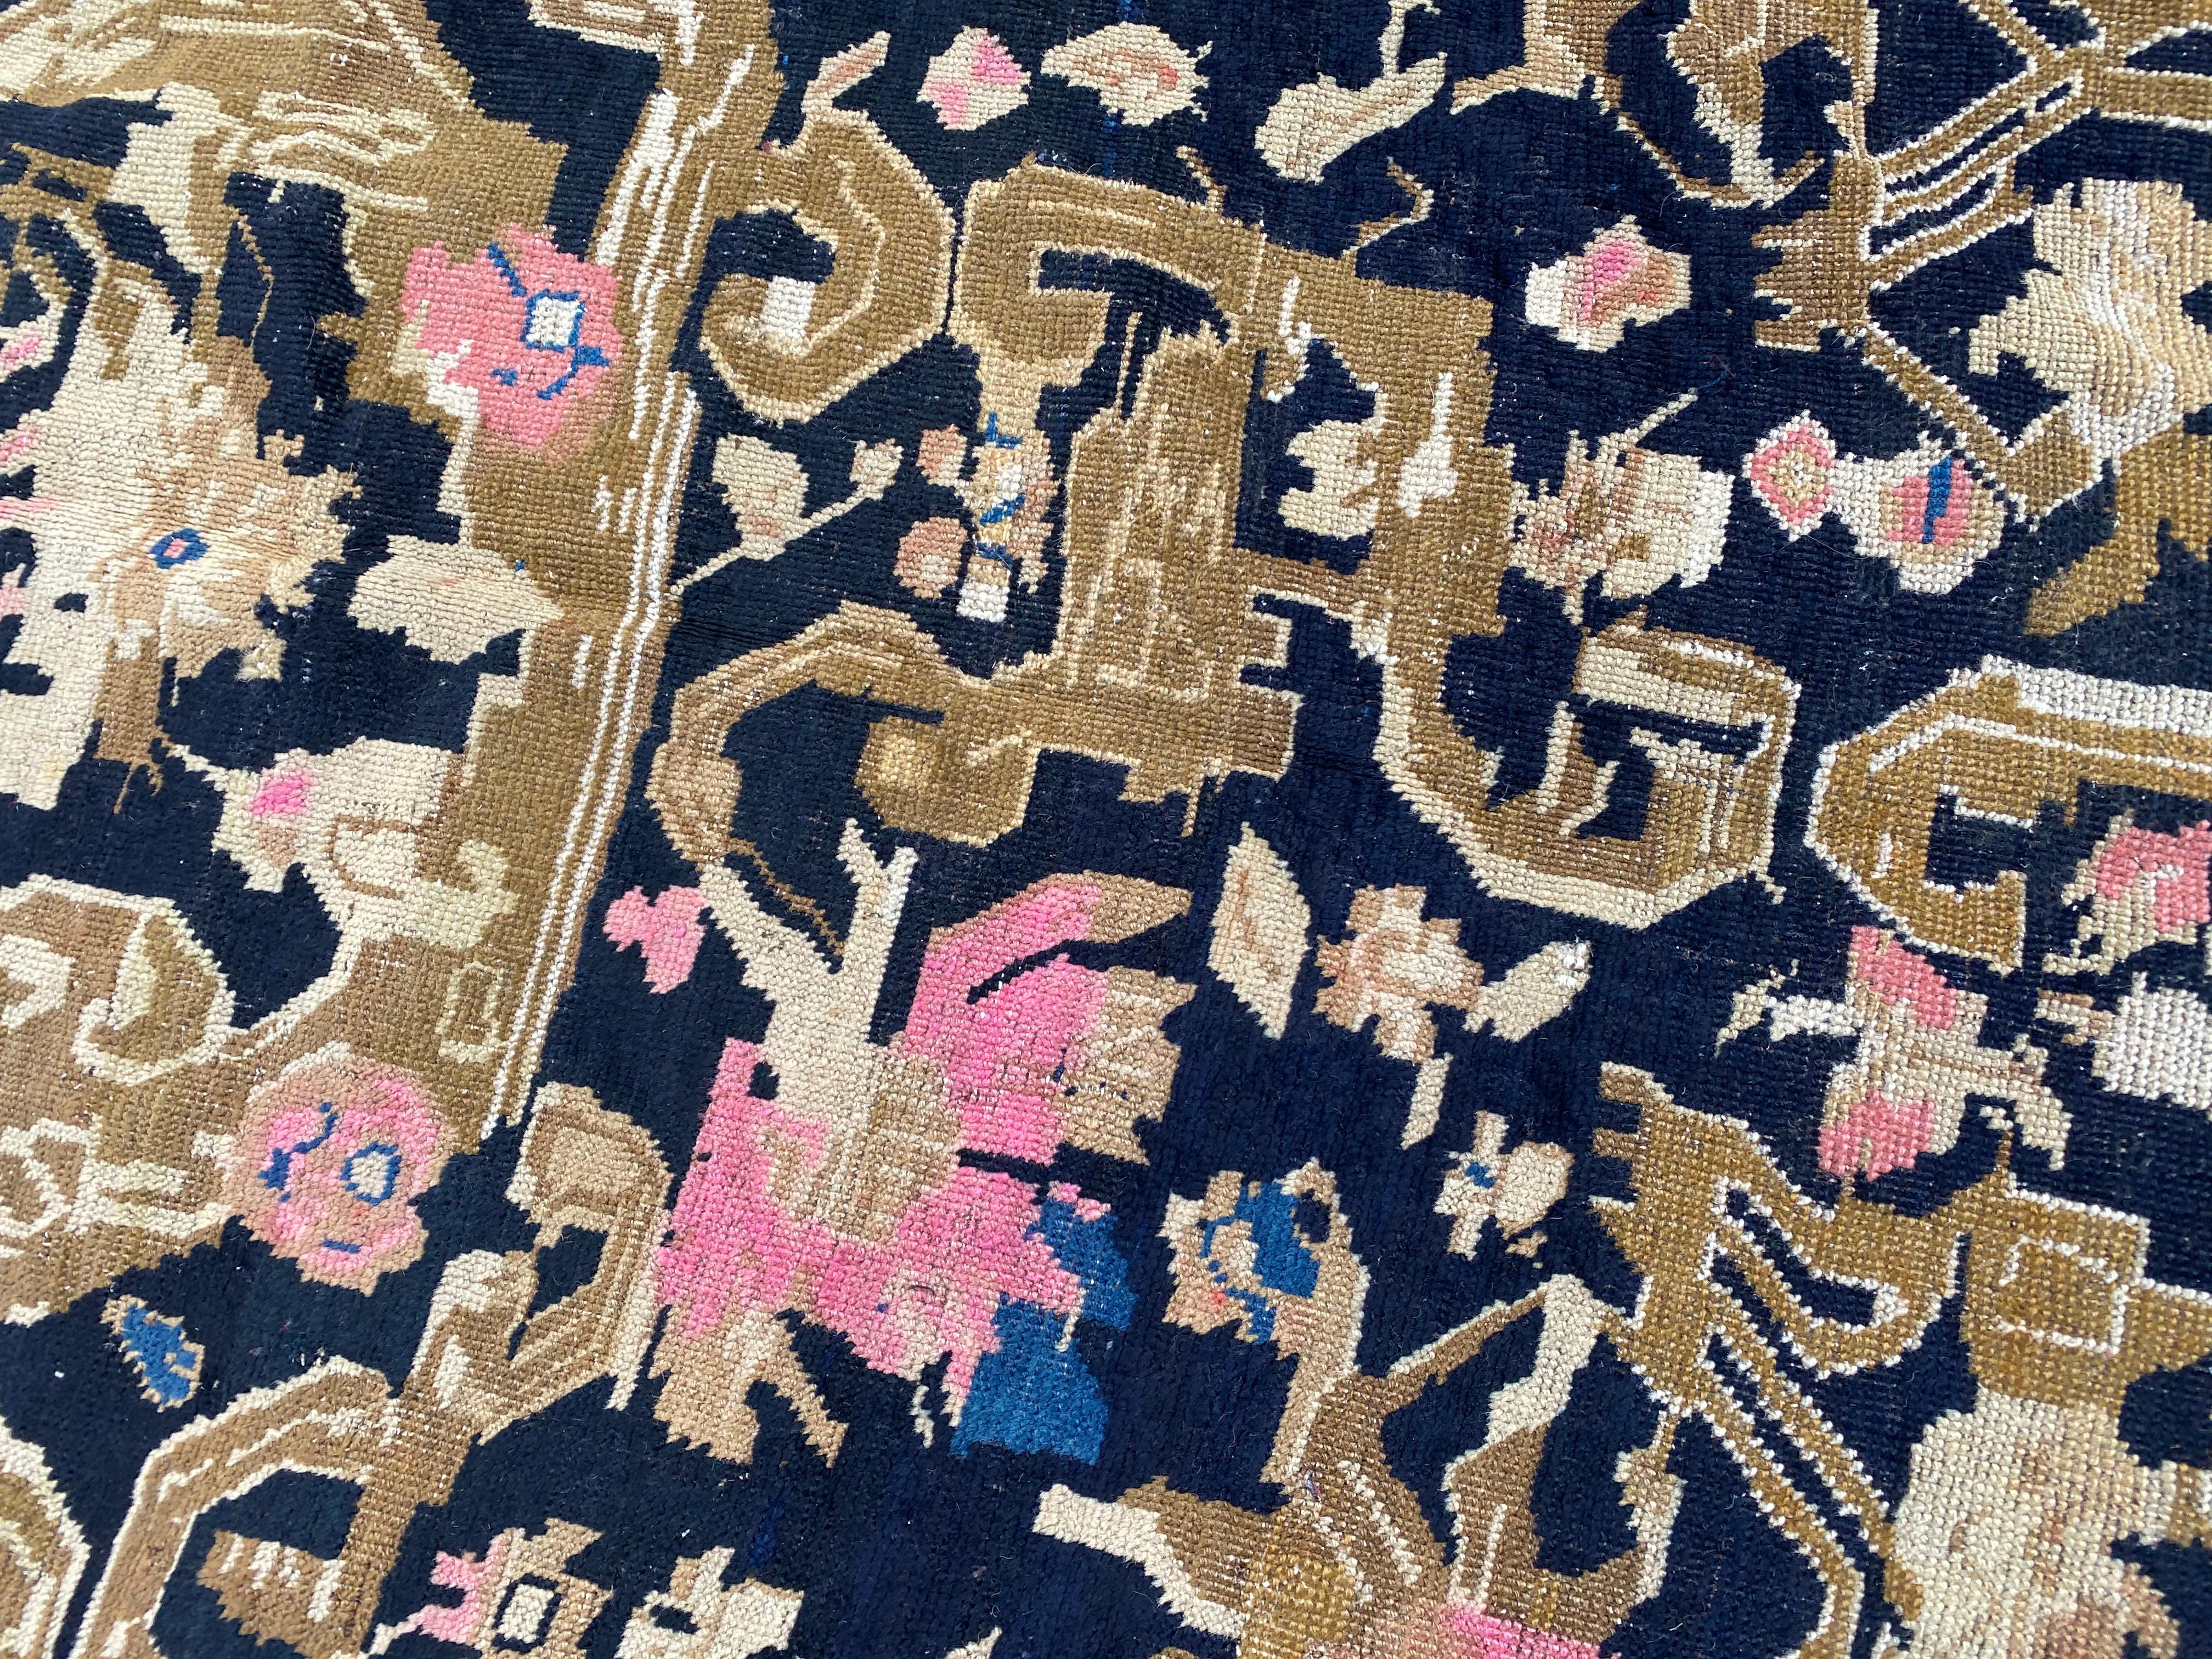 Discover the timeless elegance of a charming early 20th-century Karabagh rug. Immerse yourself in its exquisite decorative design and vibrant colors – from the rich dark brown backdrop adorned with stylized pink flowers and golden arabesques to the